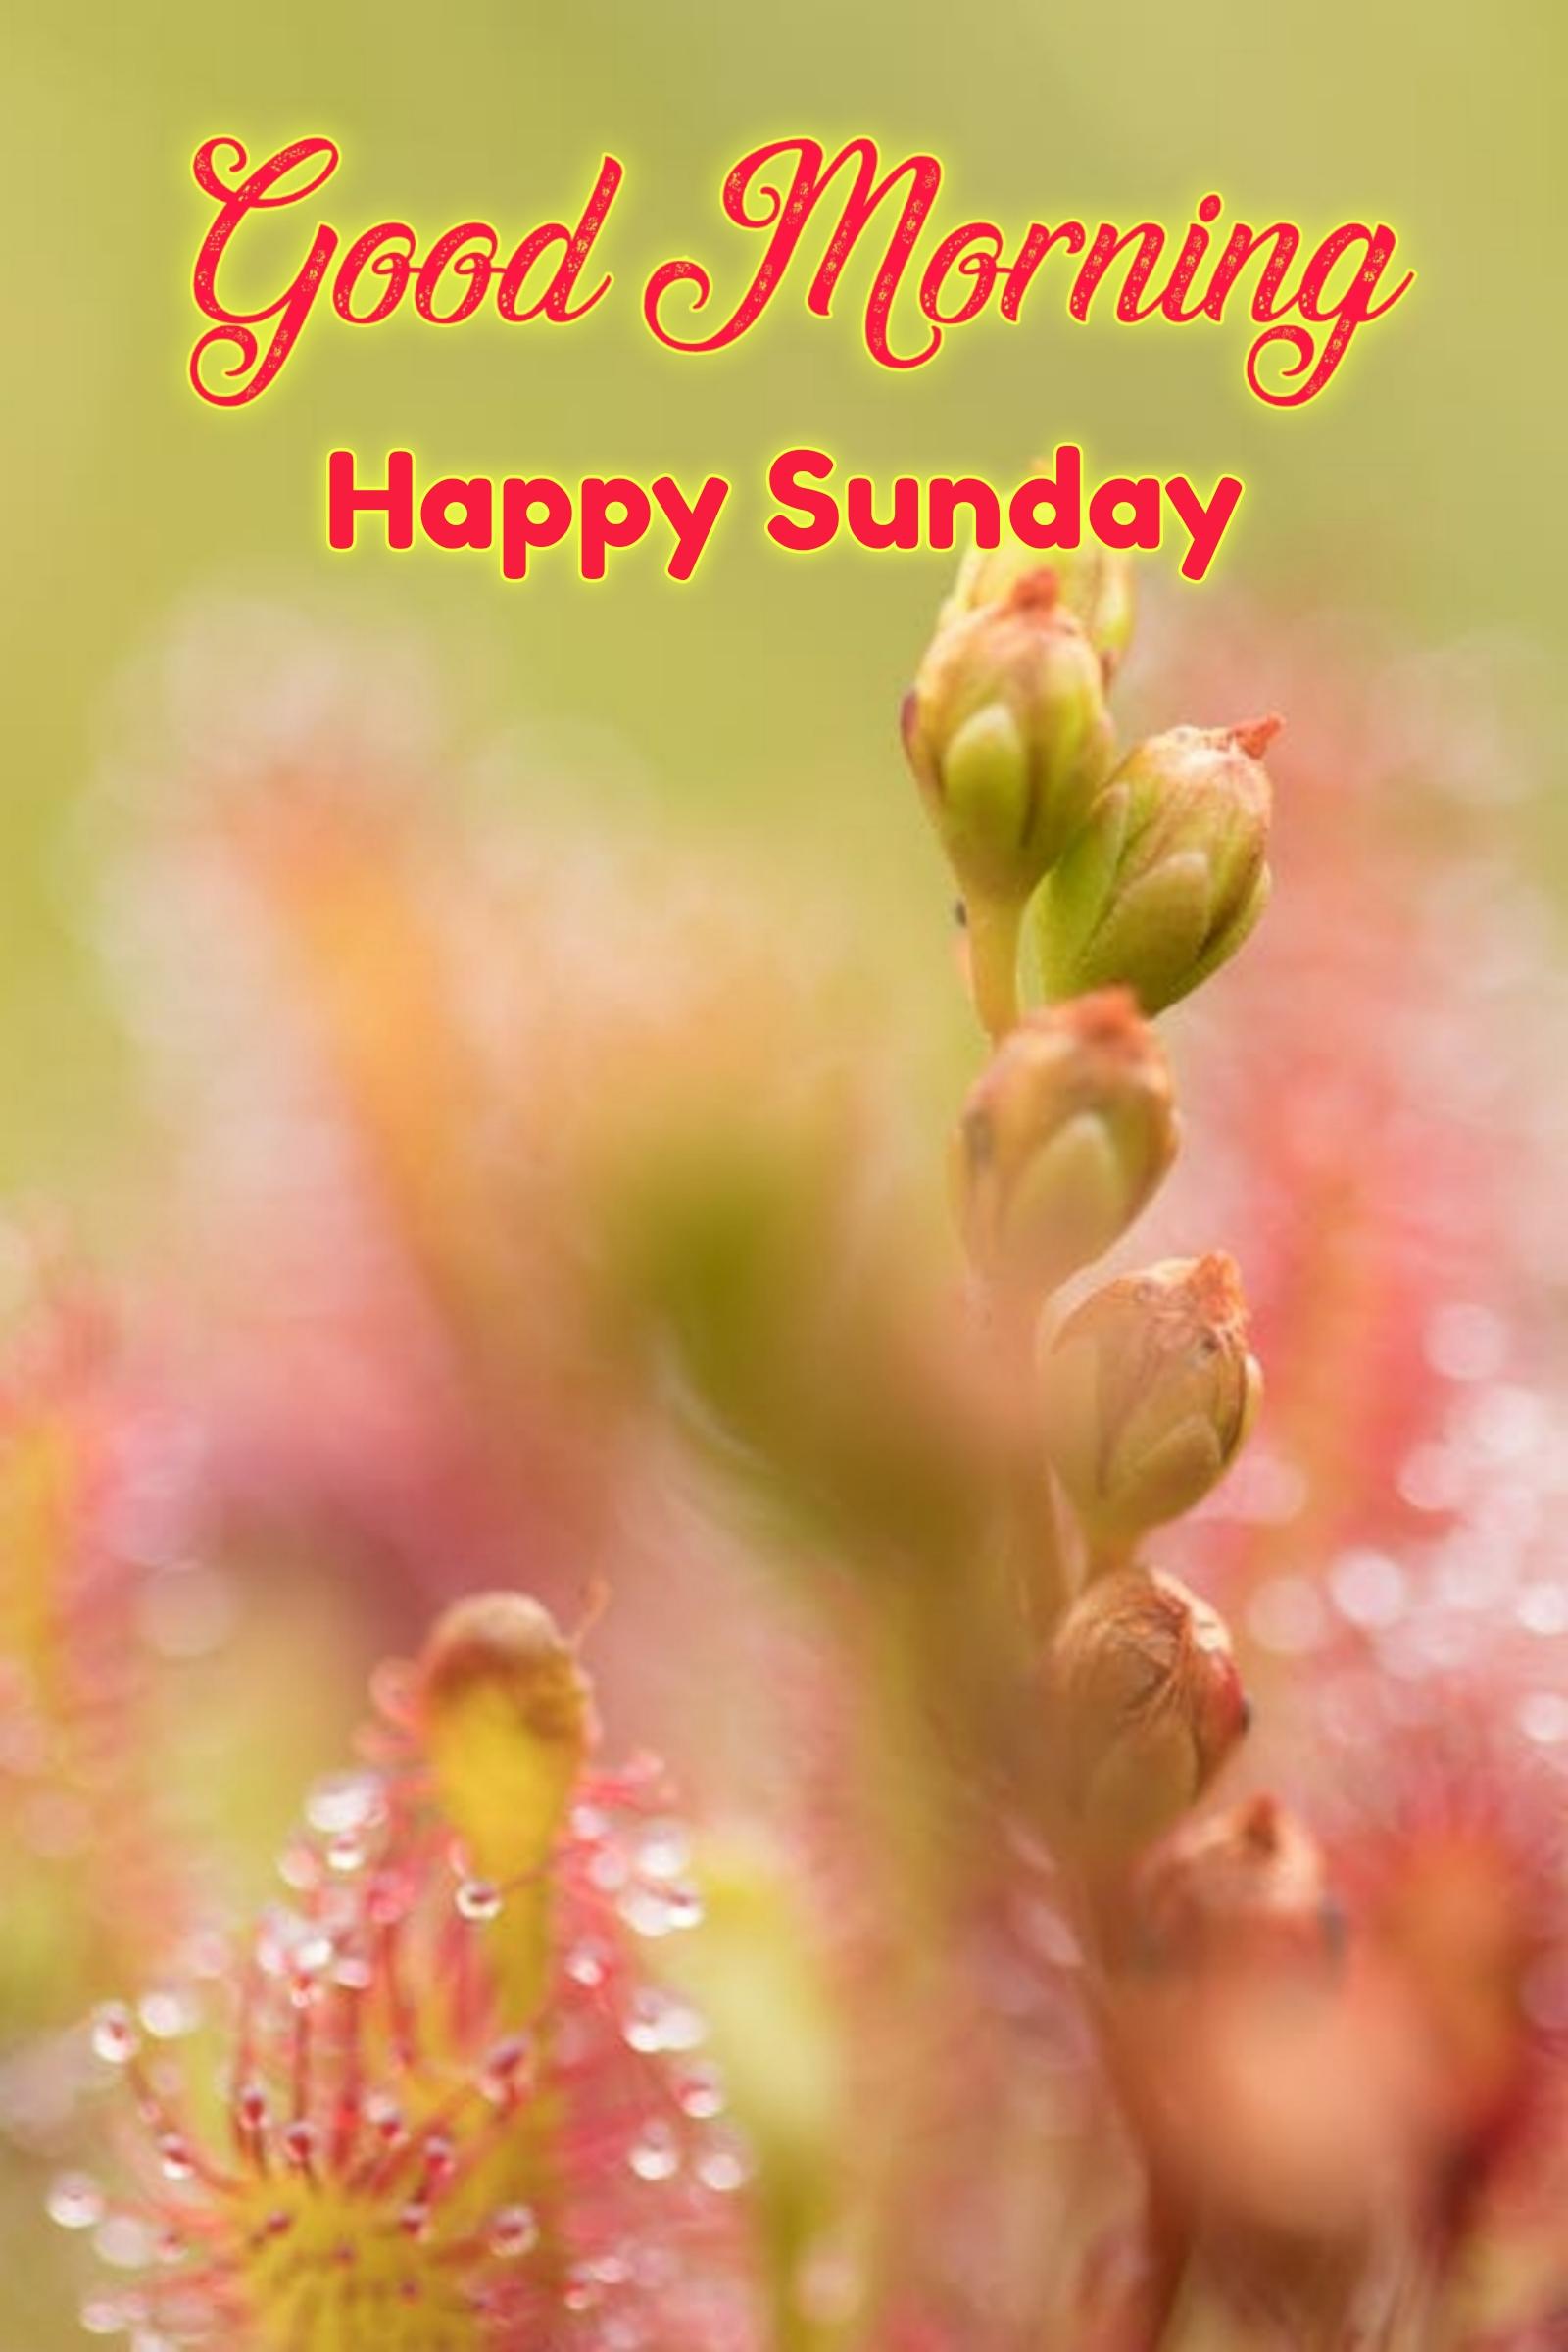 Good Morning Happy Sunday Images HD Download